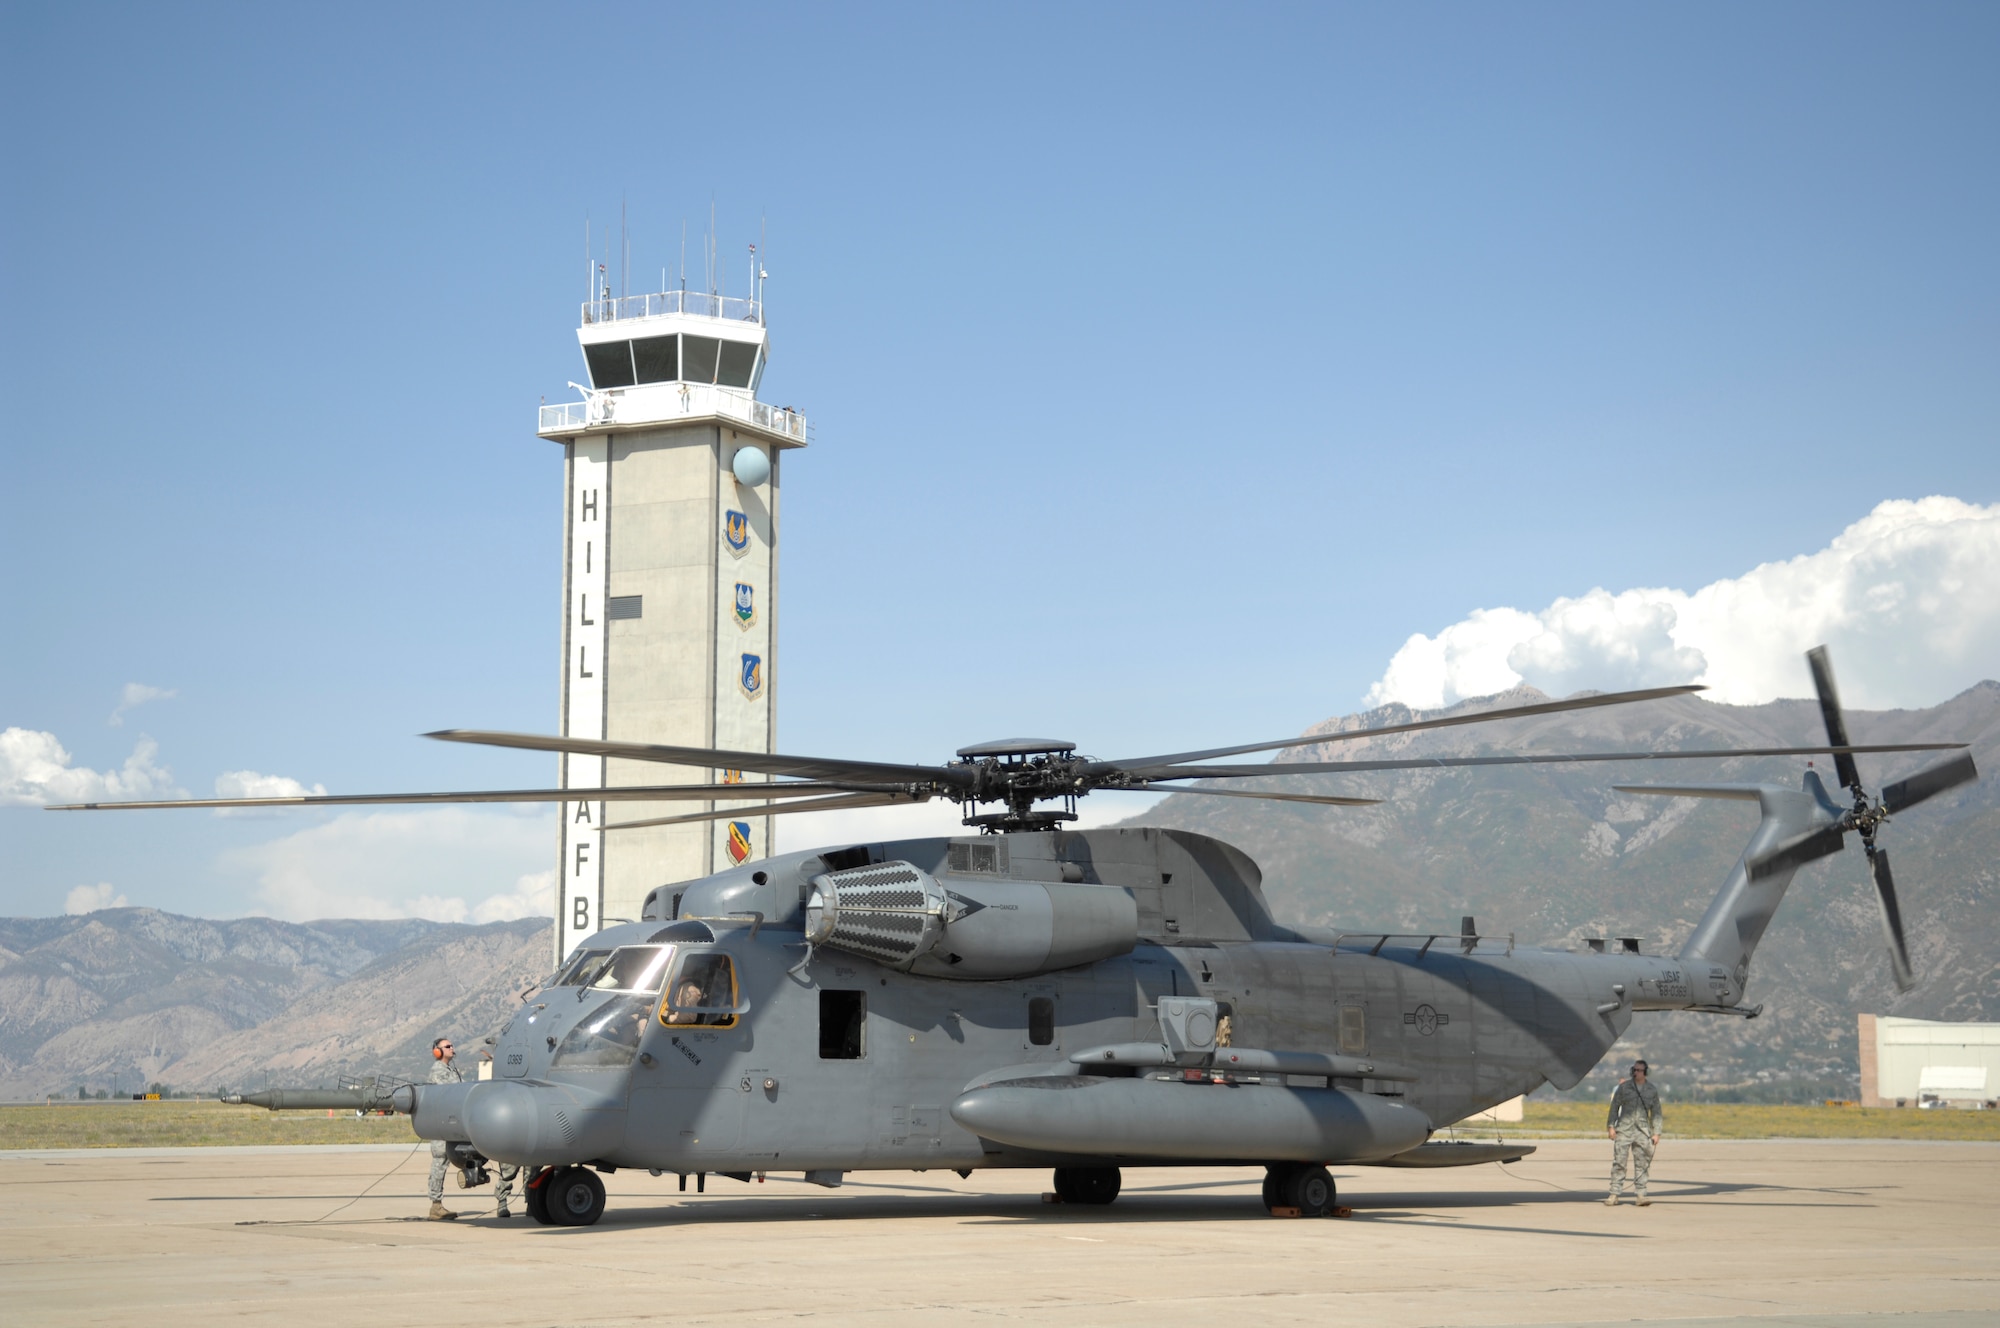 The MH-53M Pave Low Helicopter, tail number 68-10367, arrived here from Hurlburt Field, Fla., Sept. 18 to be moved to the Hill Aerospace Museum for display. Hill Air Force Base was the first base the helicopter was ever assigned to. (U.S. Air Force Photo by Todd Cromar)